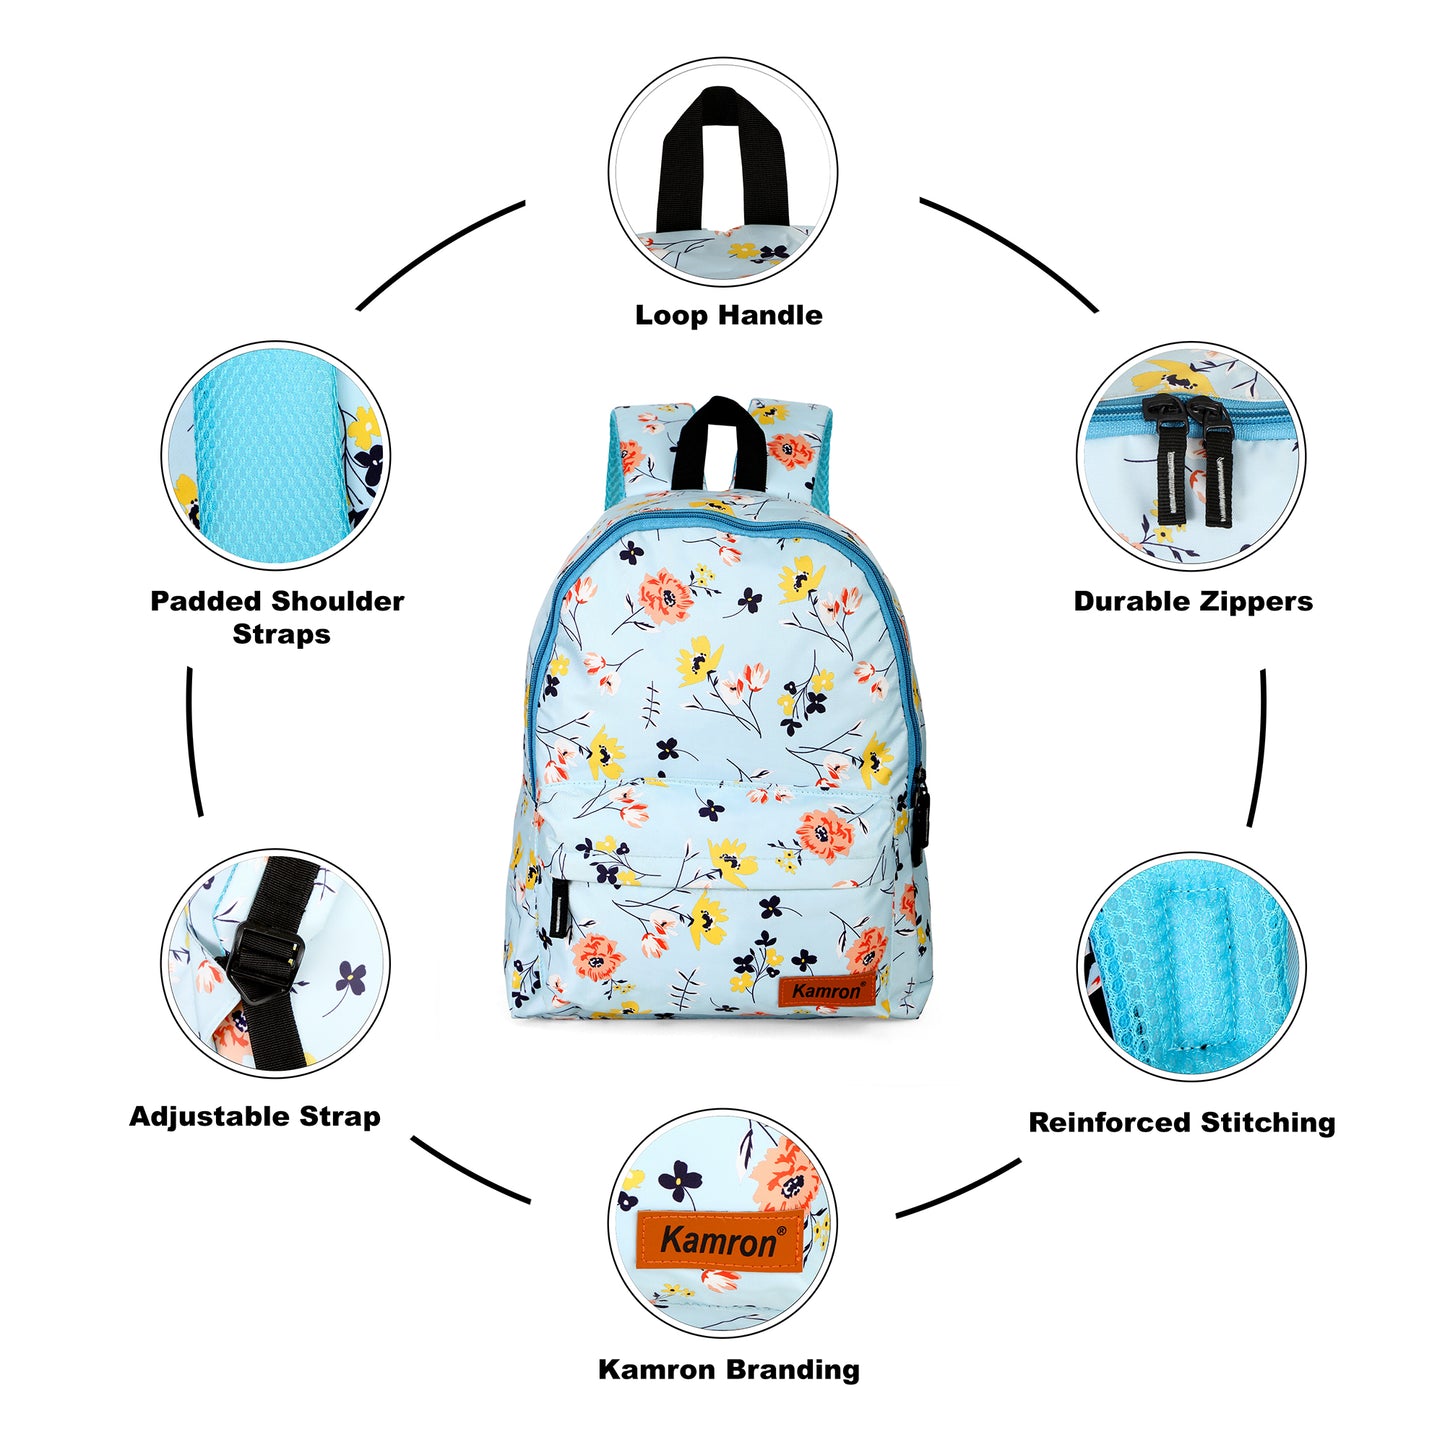 Kamron Casual Backpacks - 1 Compartment (Light Blue)